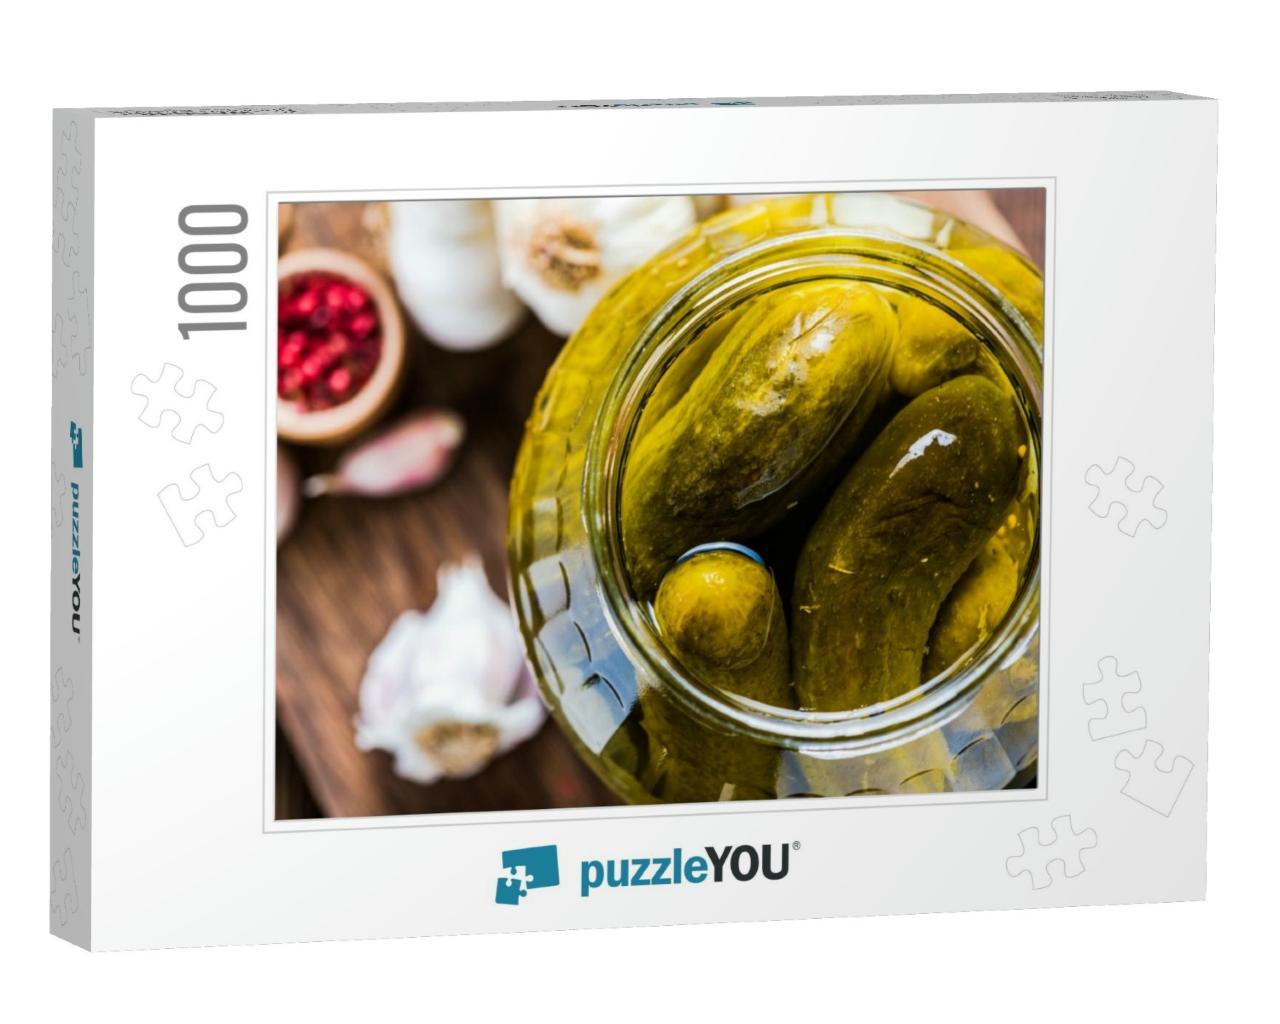 Pickled Gherkins in Jar, Fermented Food with Spice... Jigsaw Puzzle with 1000 pieces